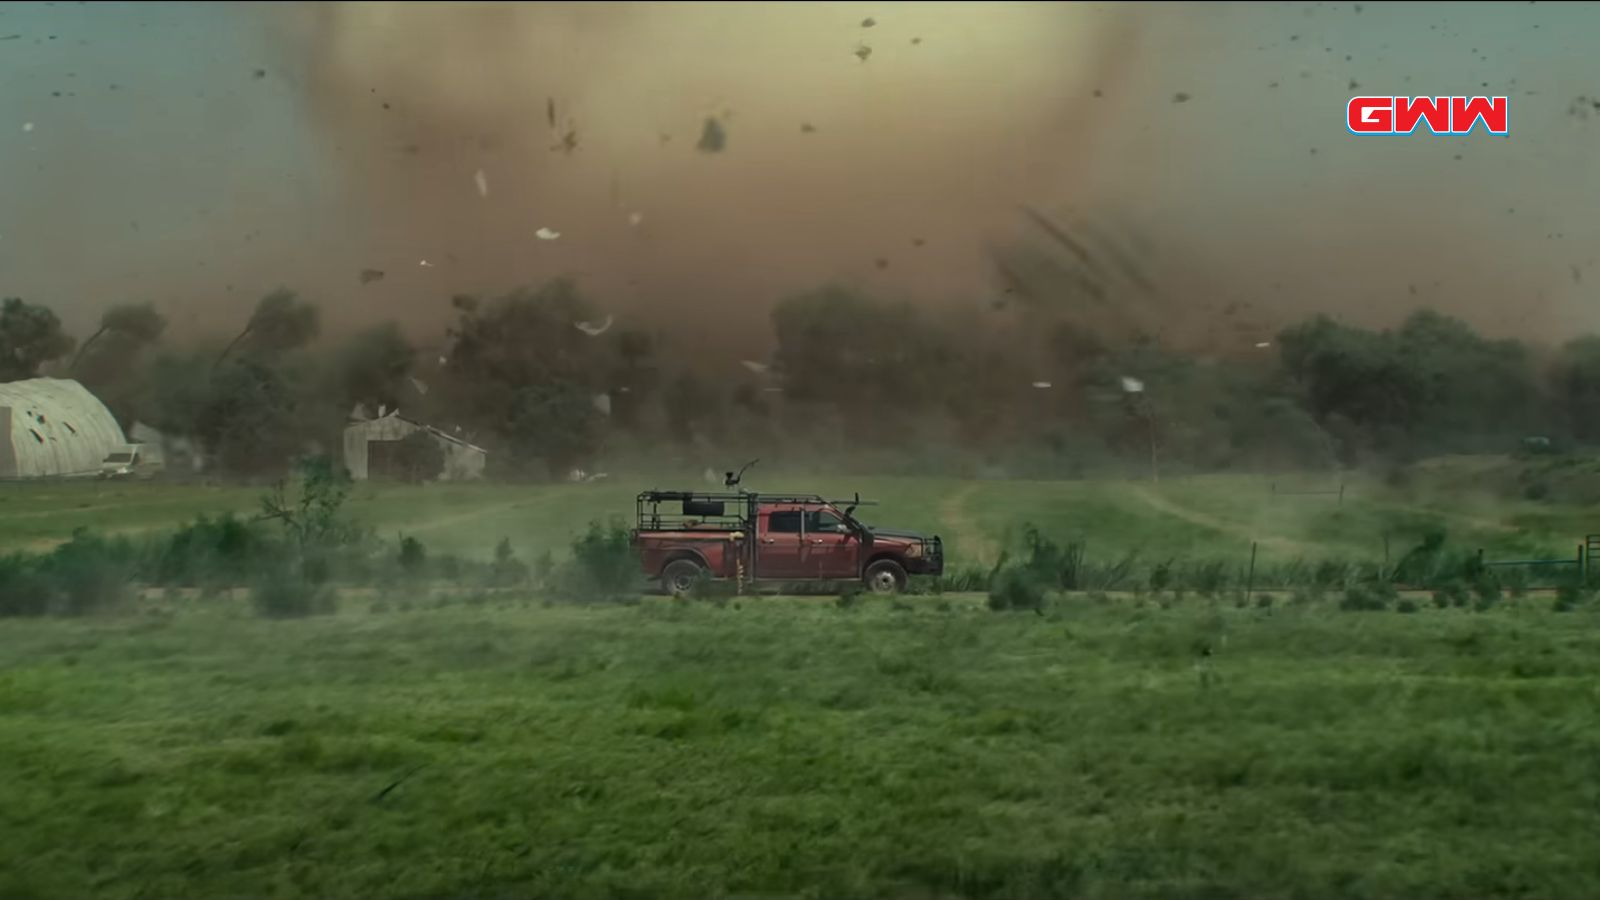 A car parked in a field with a looming twister, Twisters movie